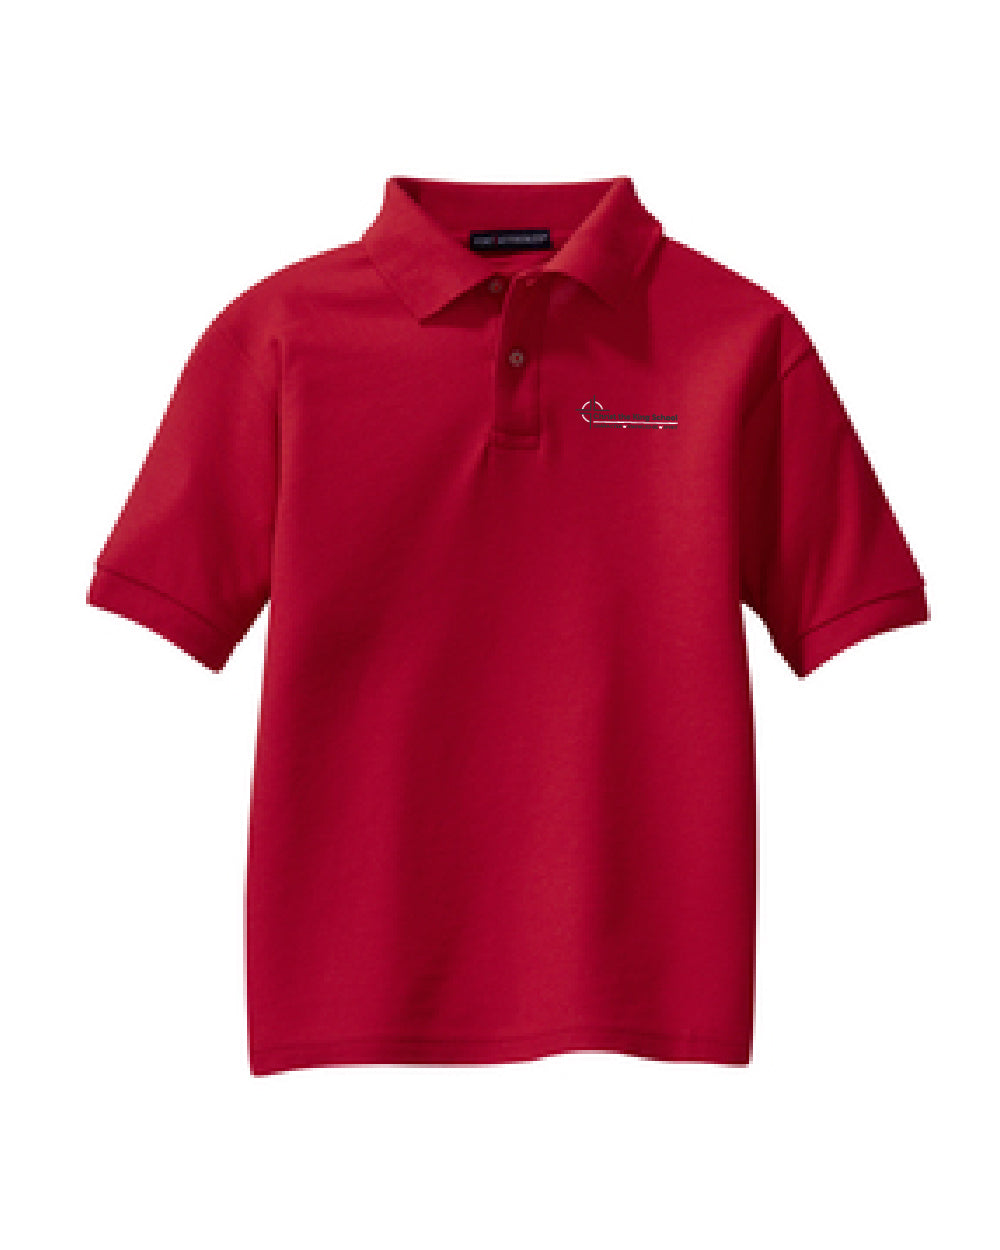 YOUTH - Pique Short Sleeve Polo - Red